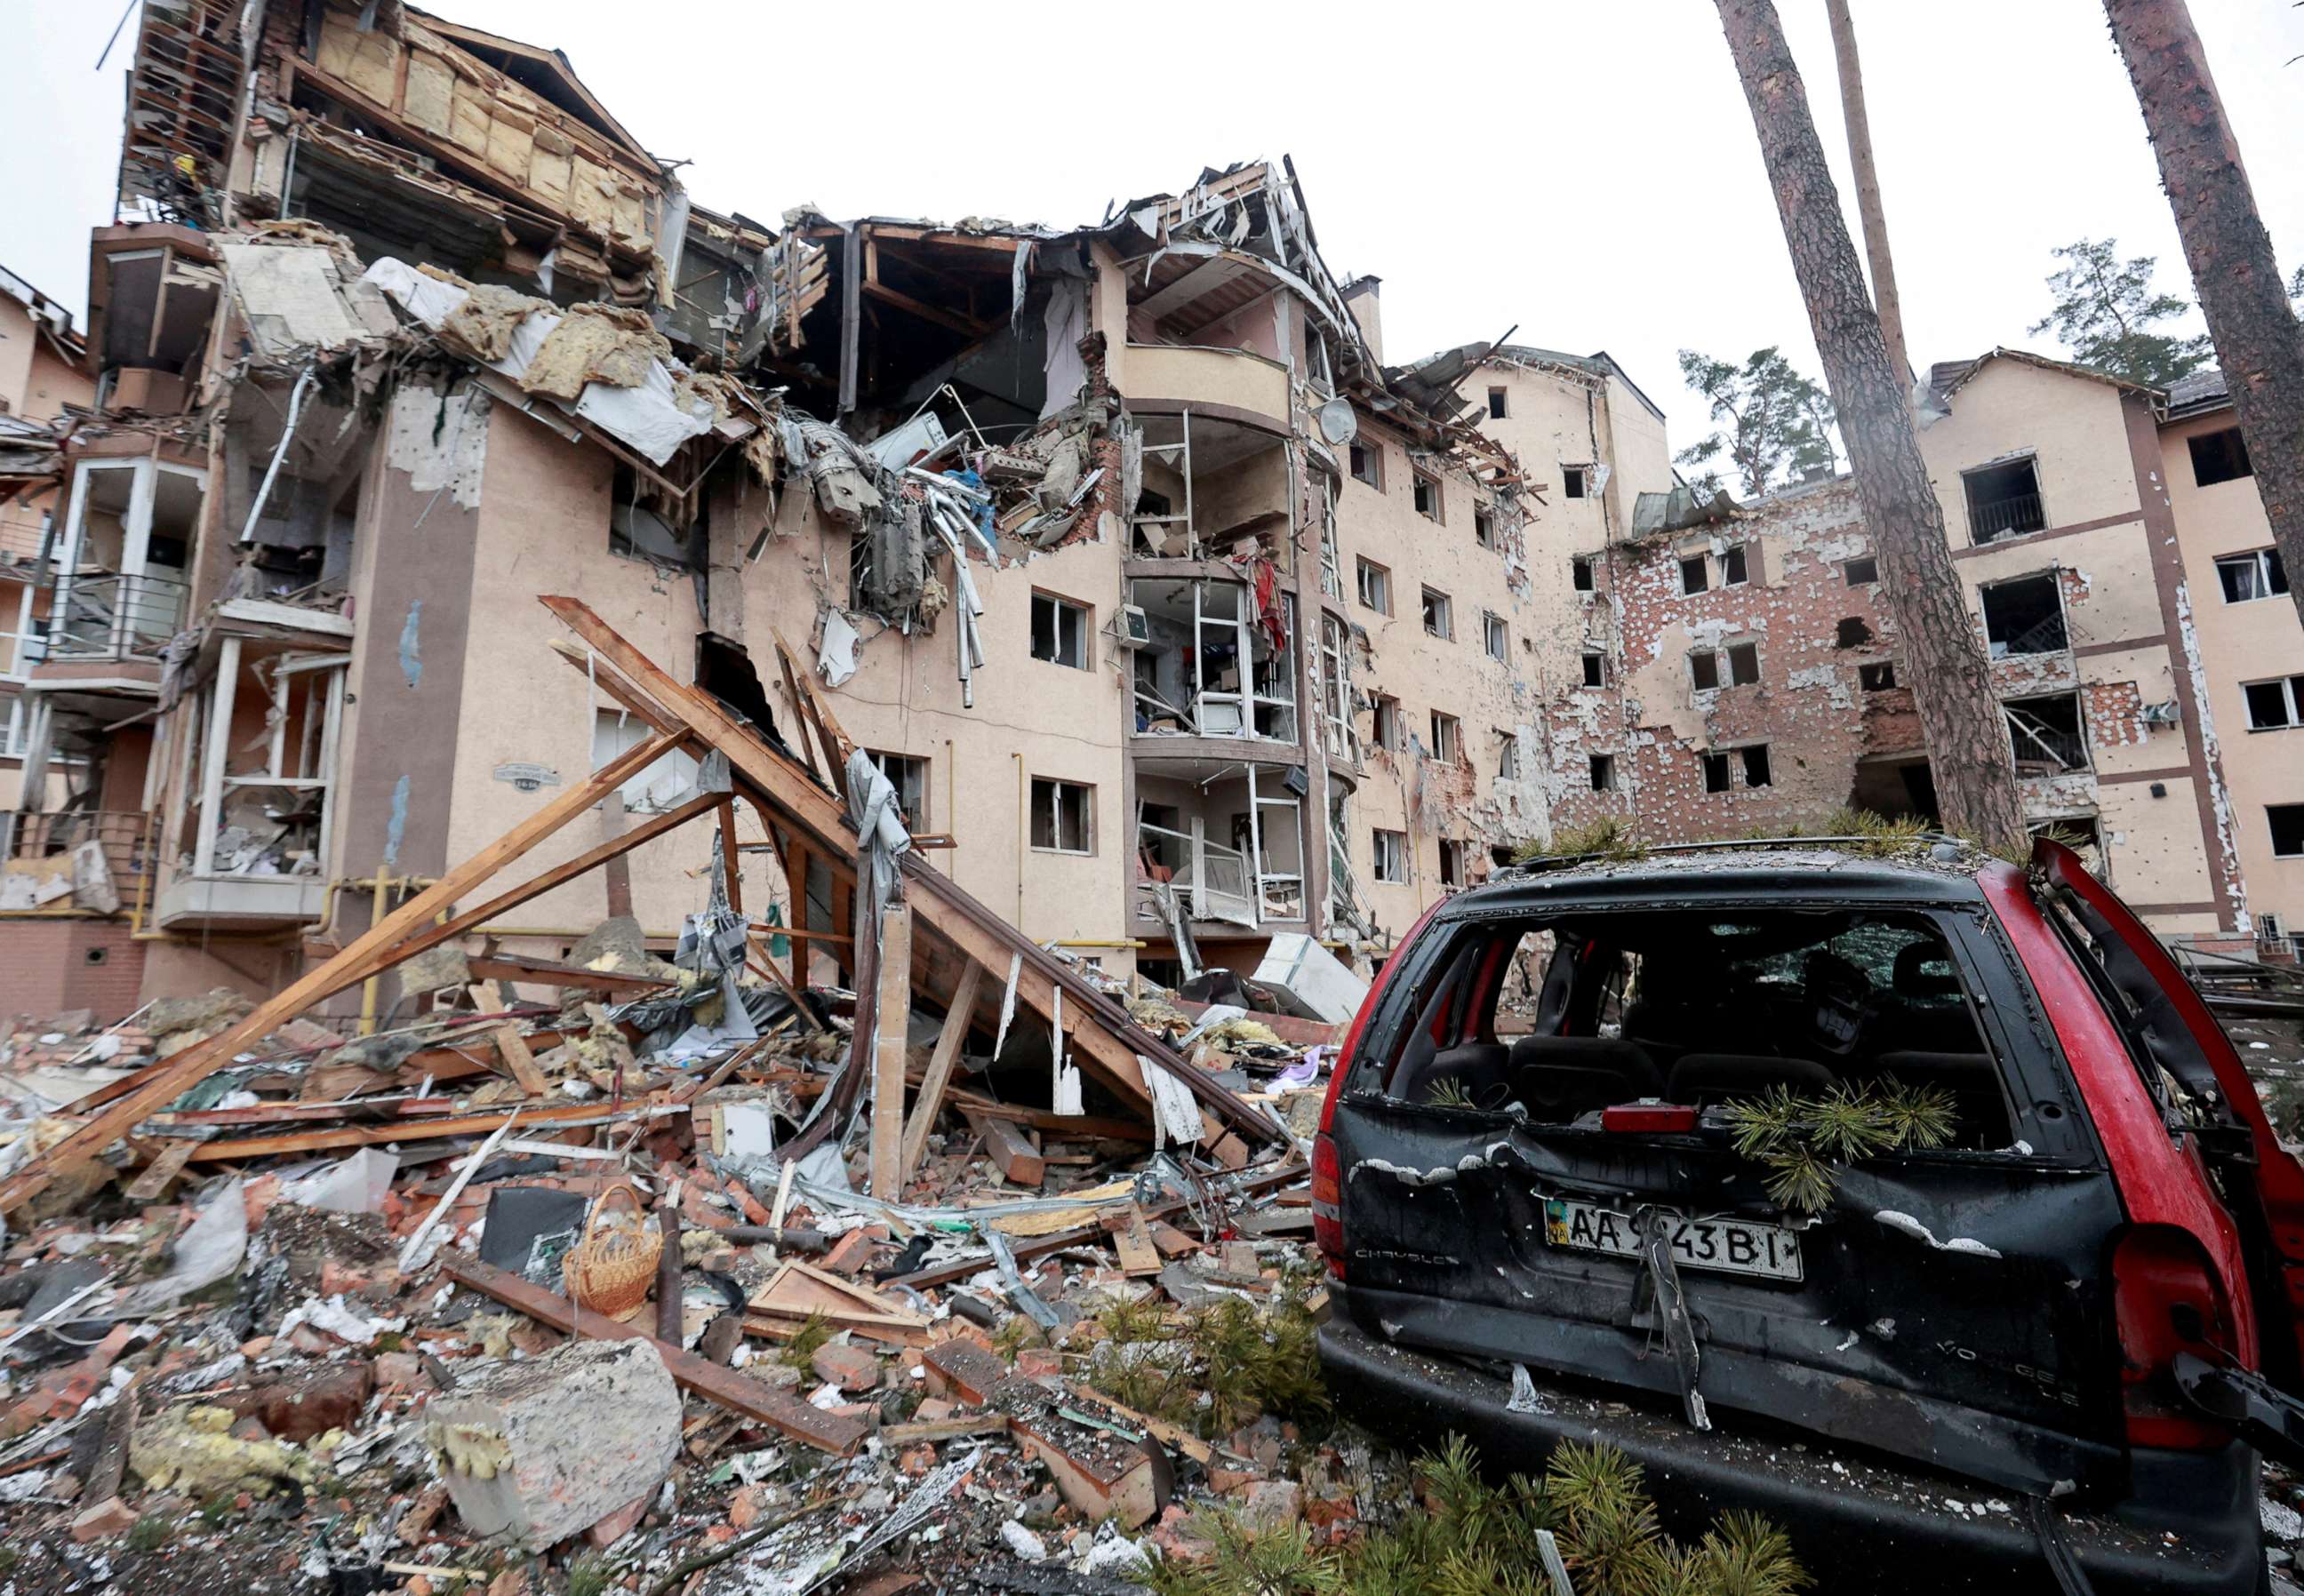 PHOTO: A view shows a residential building destroyed by recent shelling, as Russia's invasion of Ukraine continues, in the city of Irpin in the Kyiv region, Ukraine, March 2, 2022.